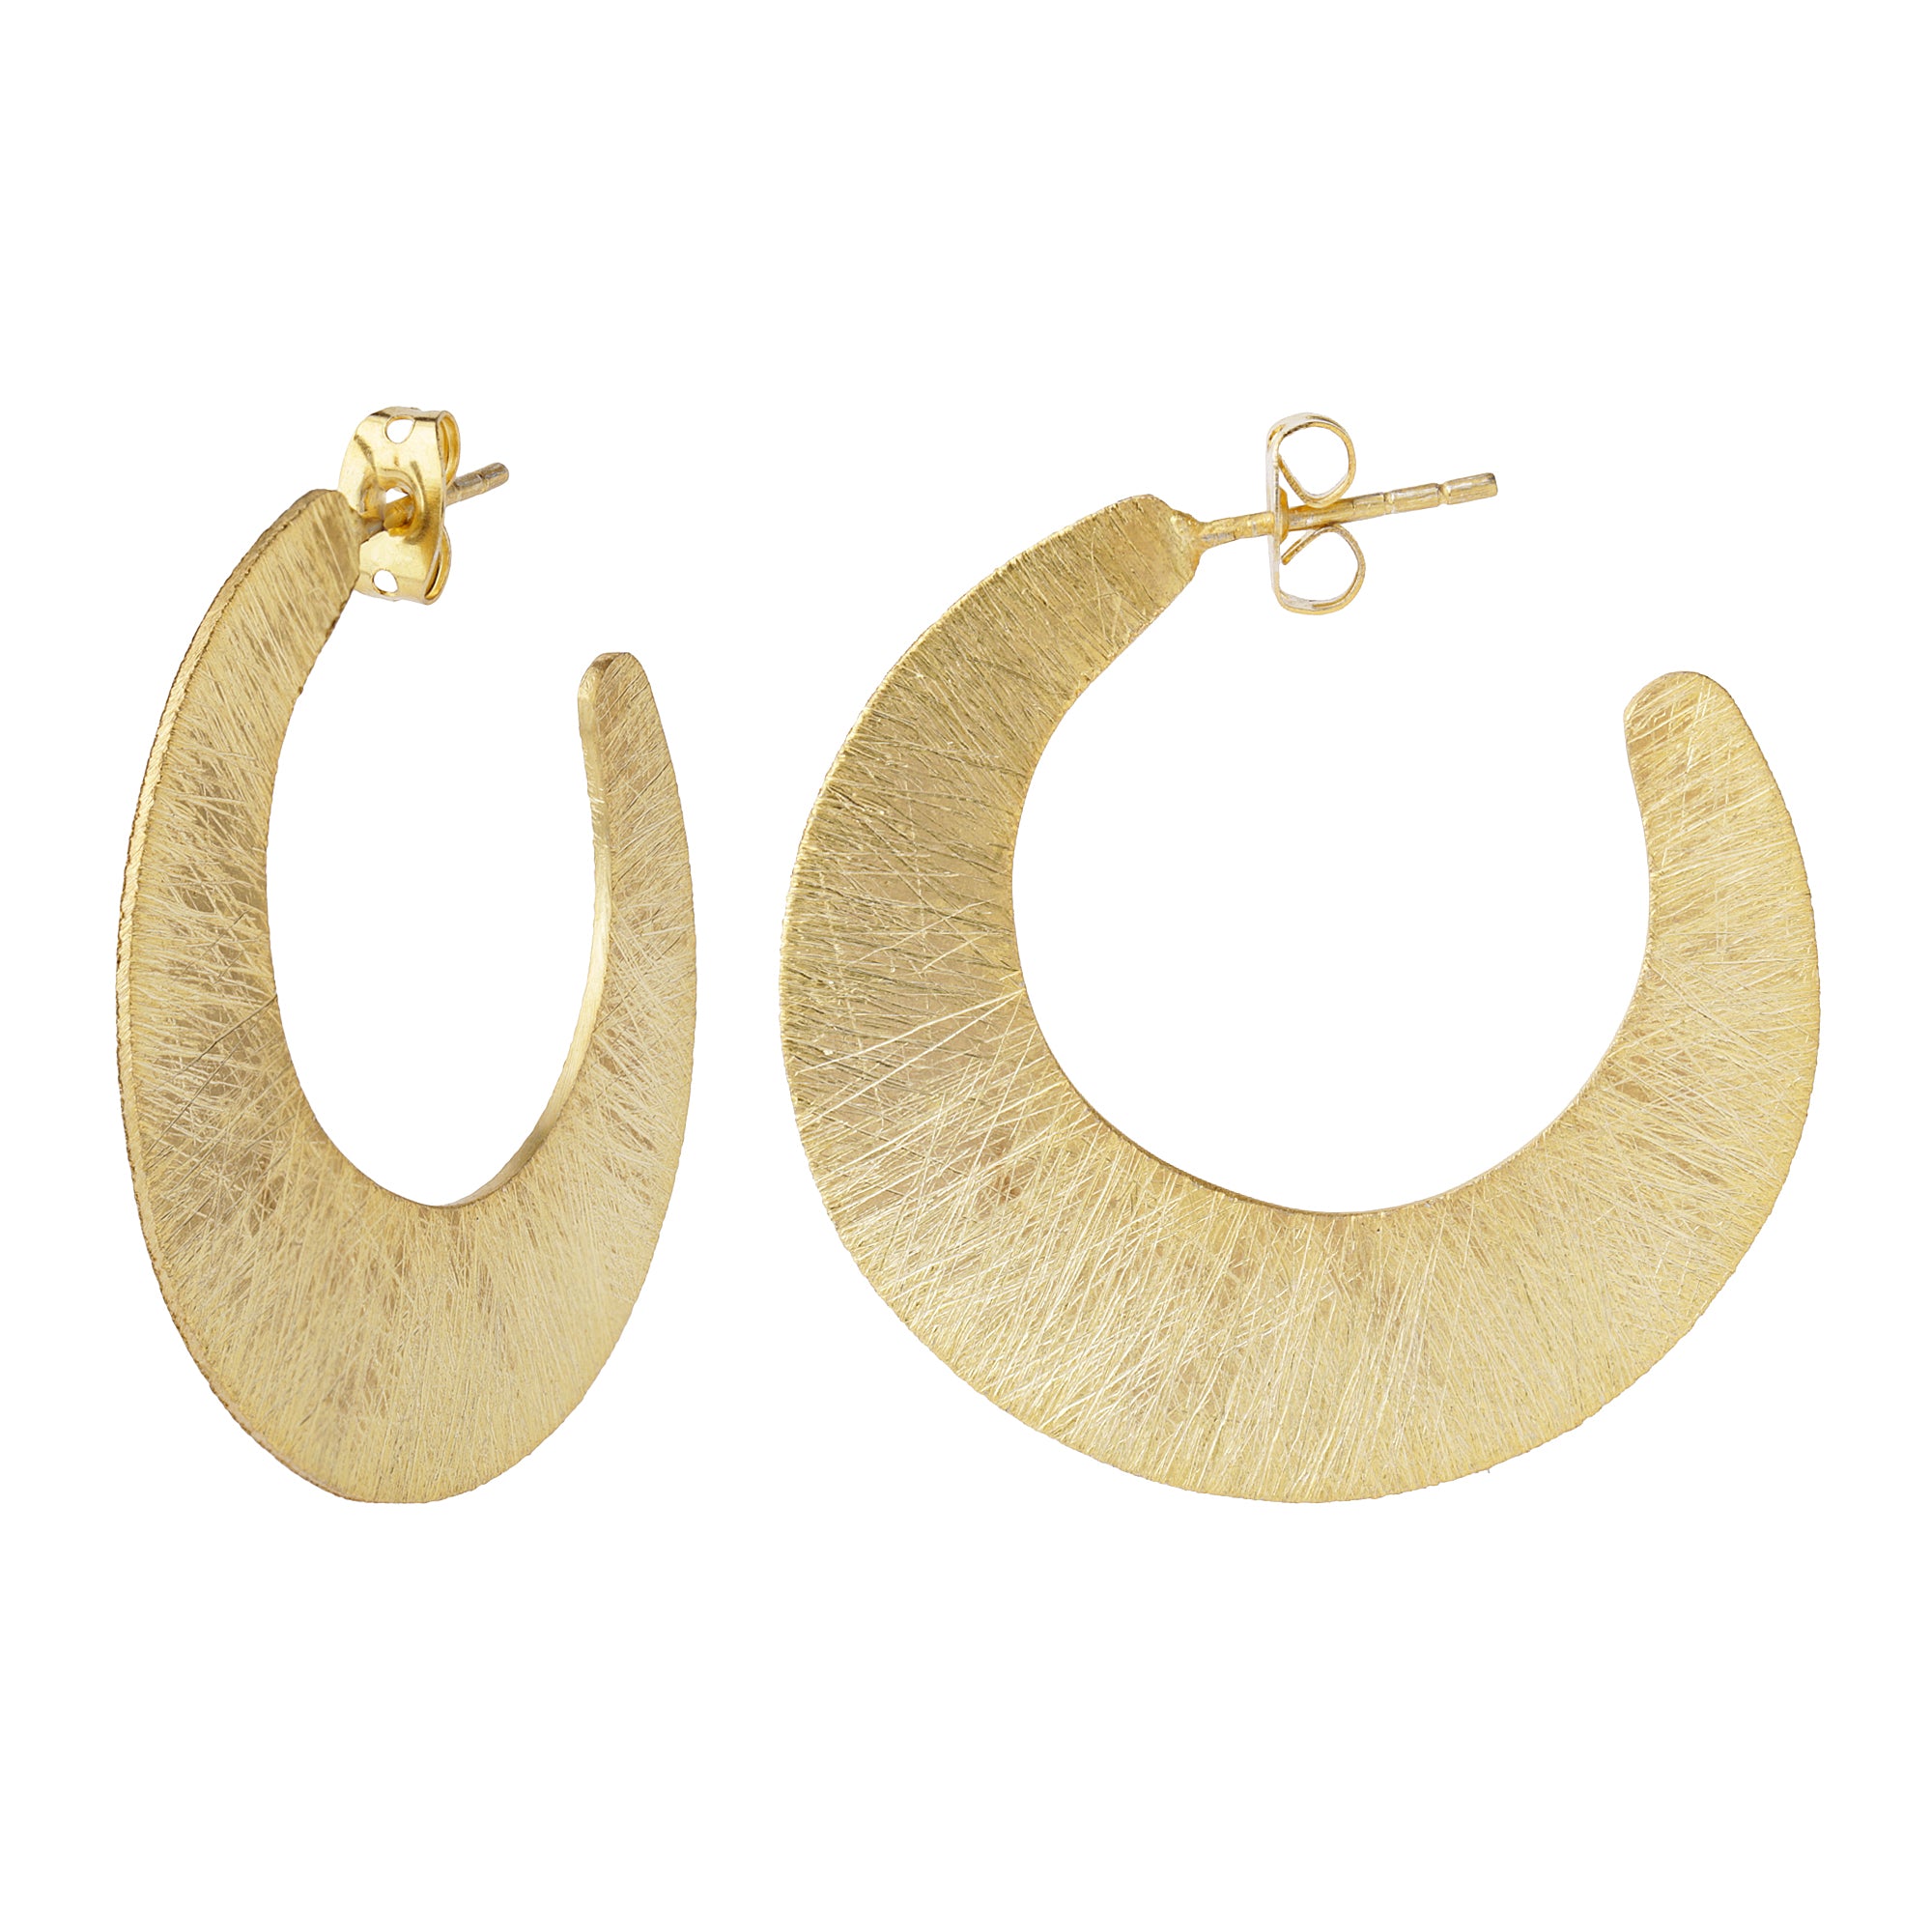 Brushed Crescent Earrings